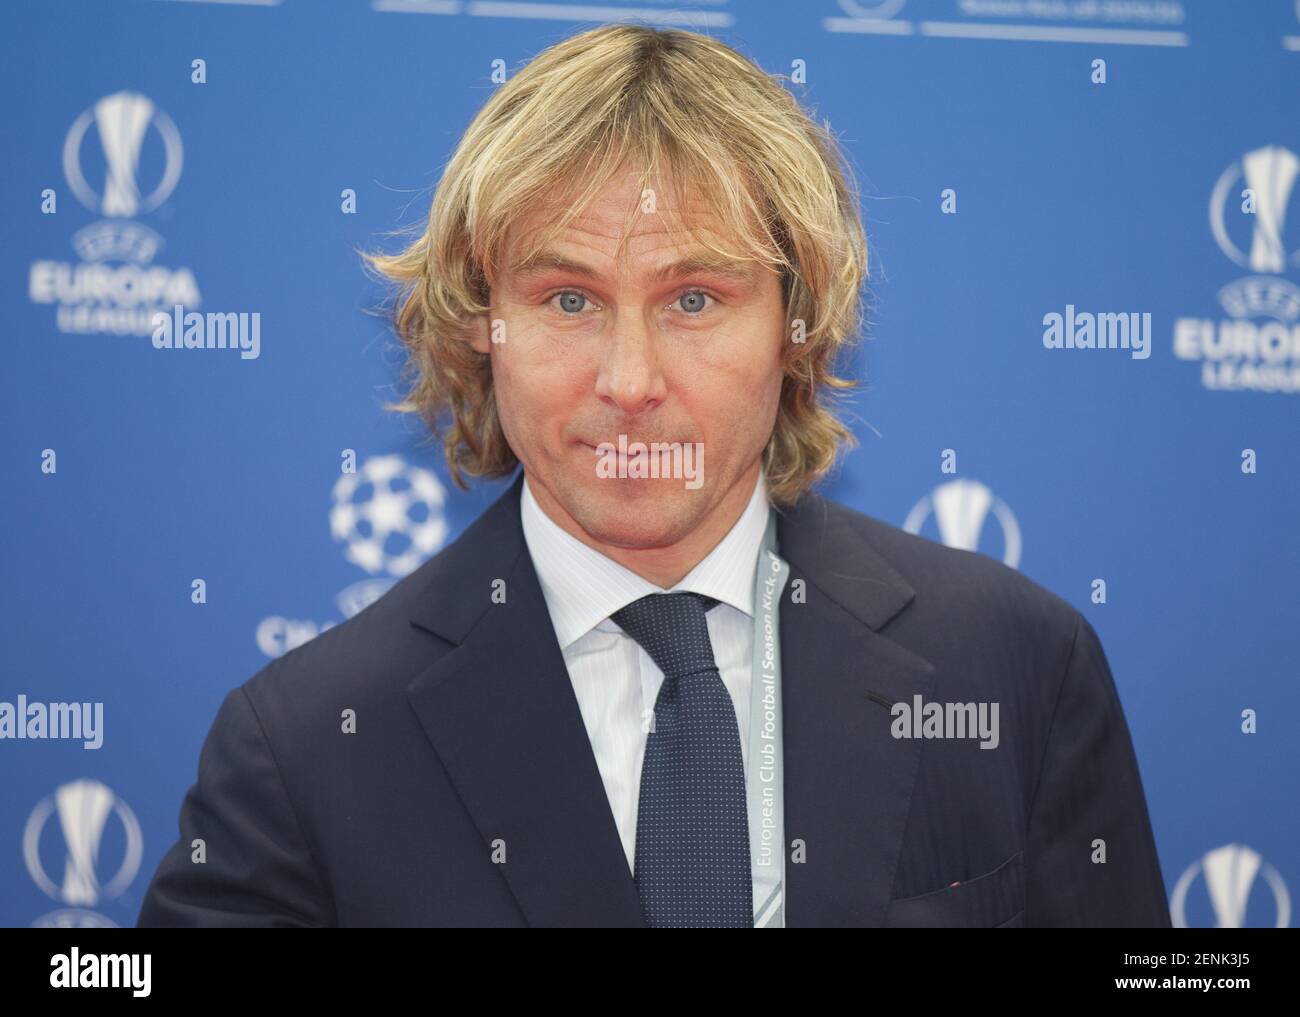 Monaco, Monte Carlo - August 29, 2019: UEFA Champions League Group Stage Draw and Player of the Year Awards, Season Kick Off 2019-2020 with Juventus Vice Chairman Pavel Nedved. (Photo by Mandoga Media/Sipa USA) Stock Photo